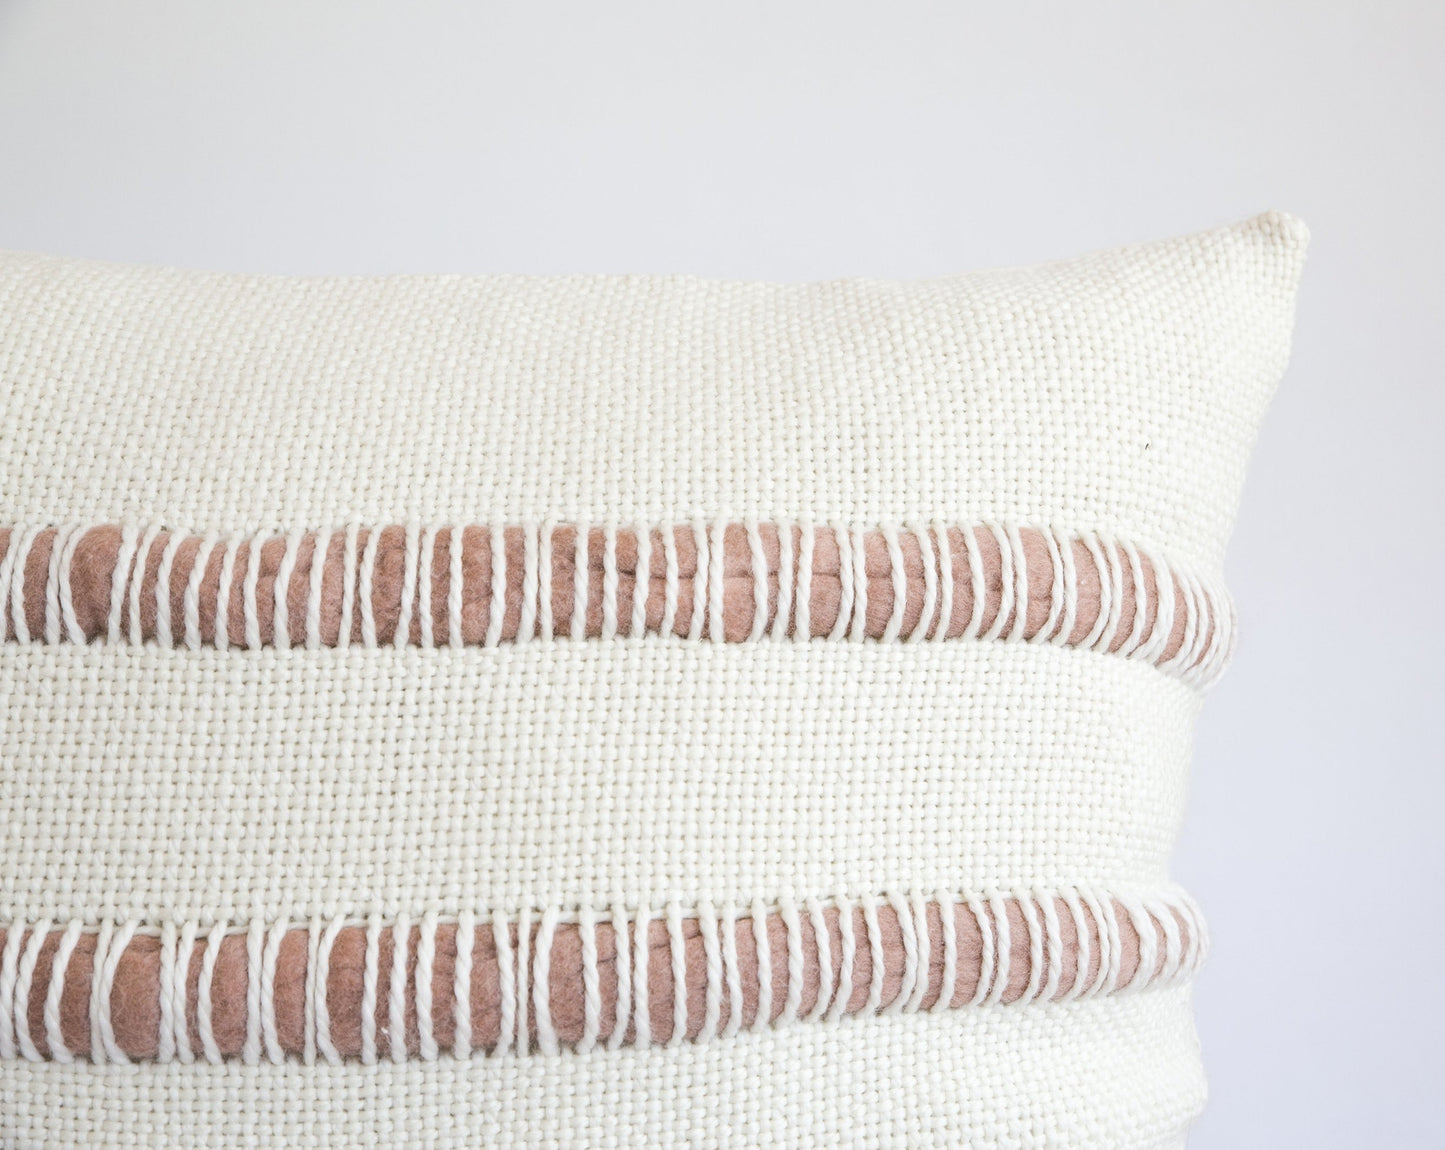 Handwoven cushion cover with rose roving stripes - Closely details